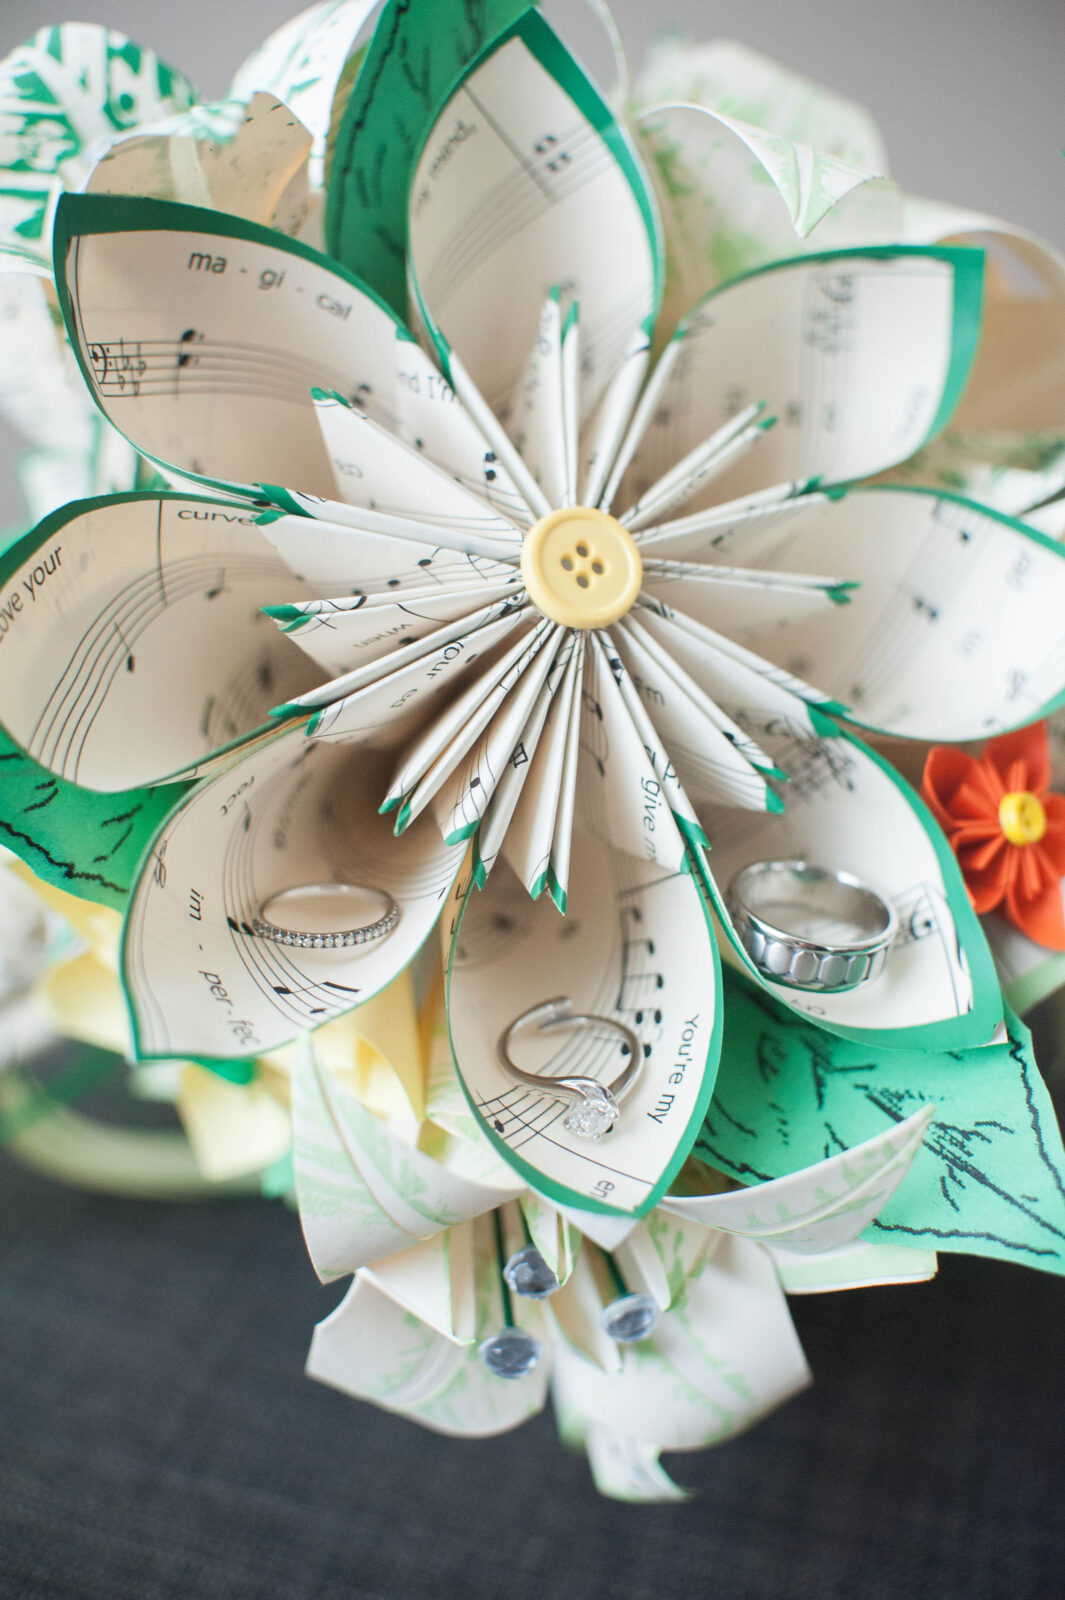 Paper flowers made from sheet music personally picked for each bridesmaid, designed in a green color theme  and a yellow button as center, with rings placed in aspects of that paper flower